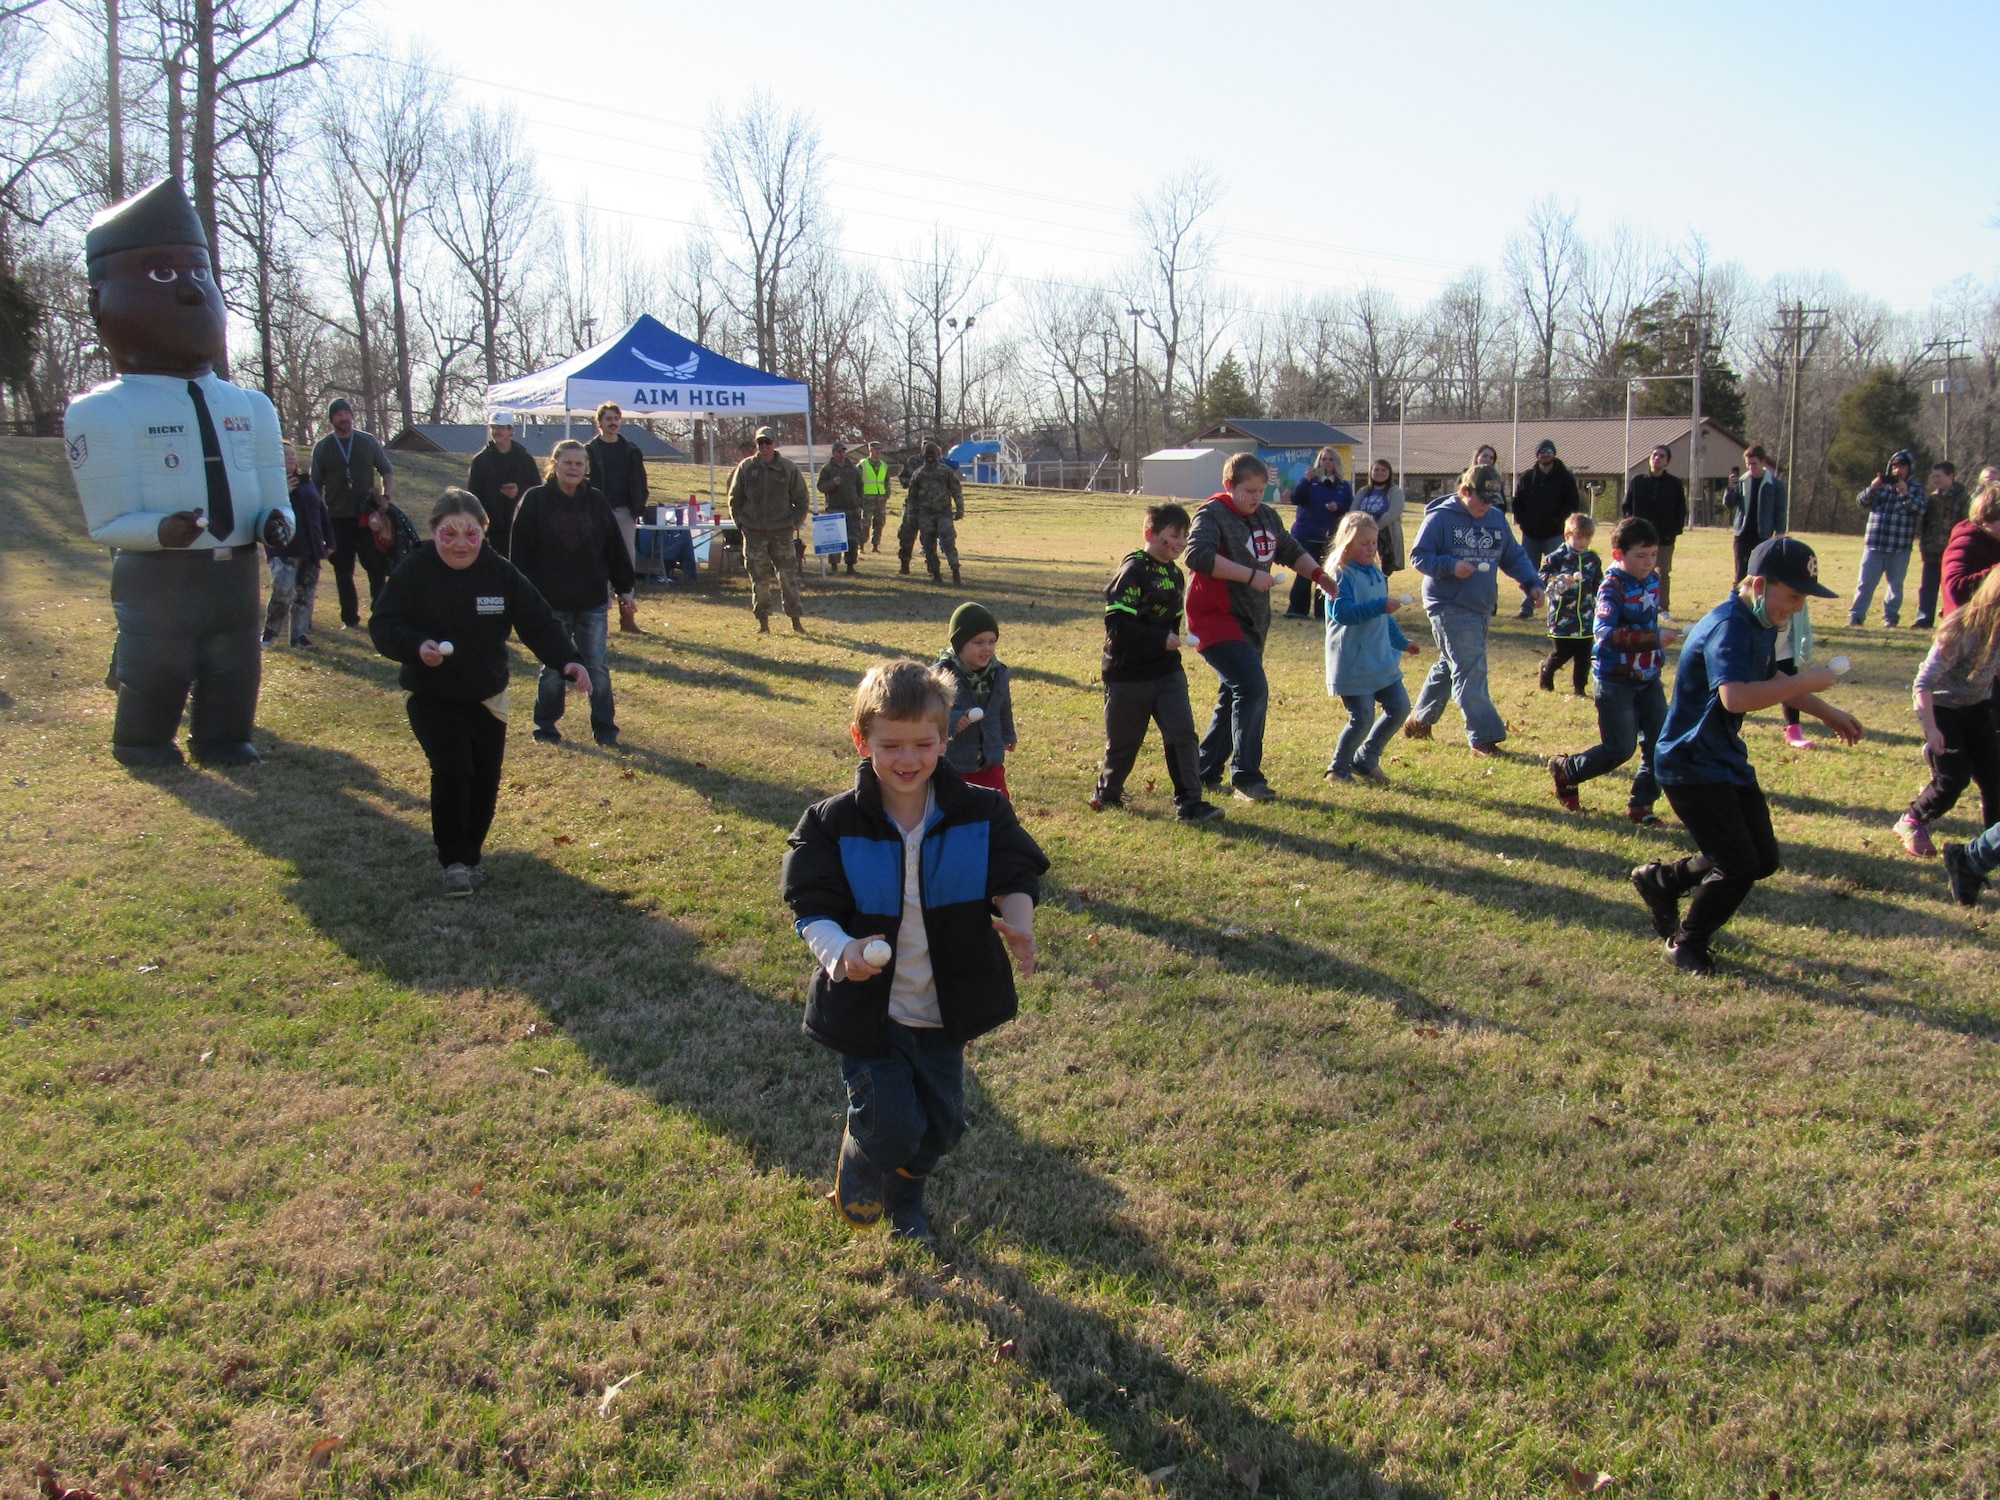 Children play during an event organized by Air Force Recruiters to help tornado victims in Dawson Springs, Kentucky, Jan. 13, 2022.